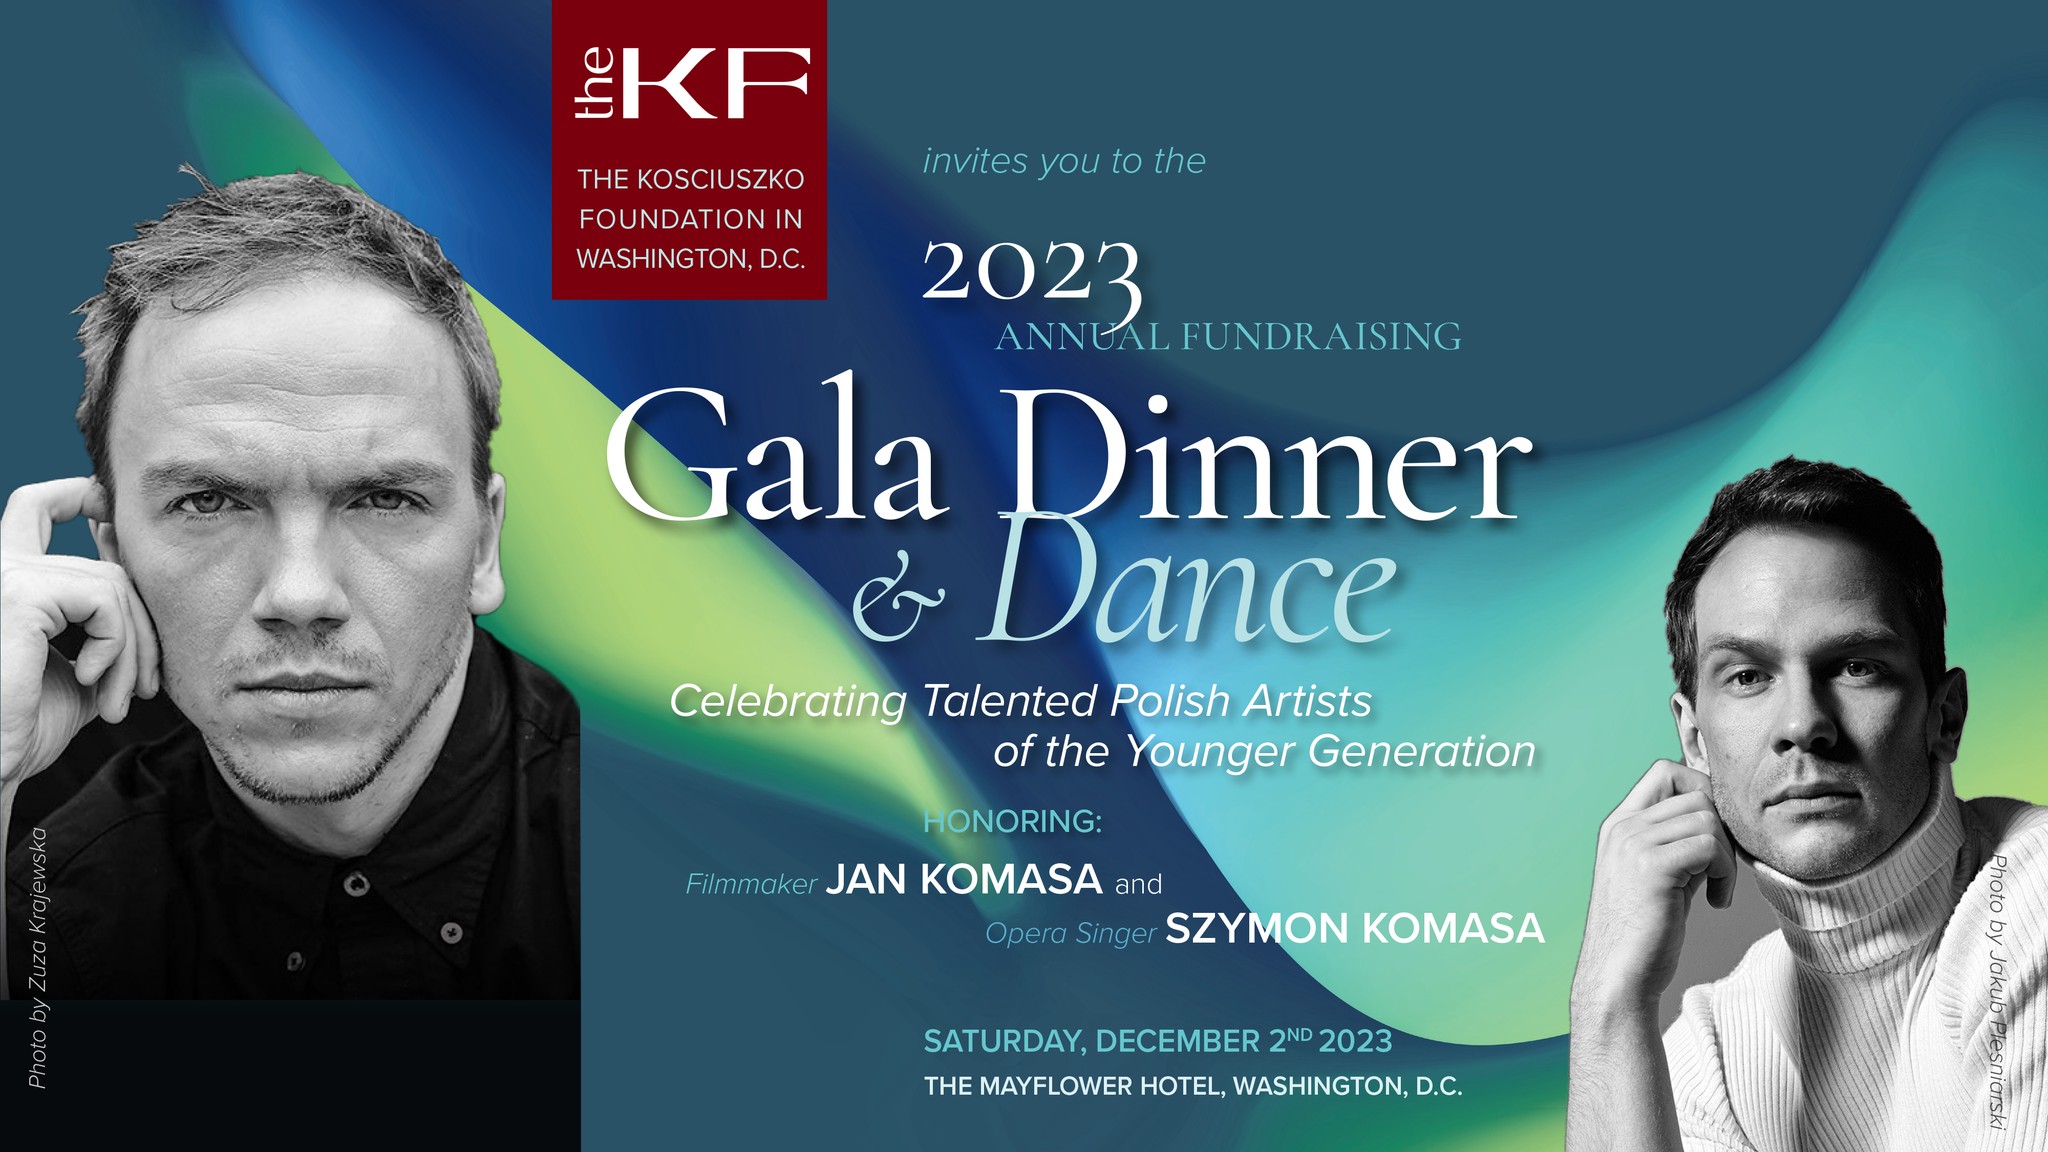 The KF: 2023 Annual Fundraising Gala Dinner and Dance in Washington, DC